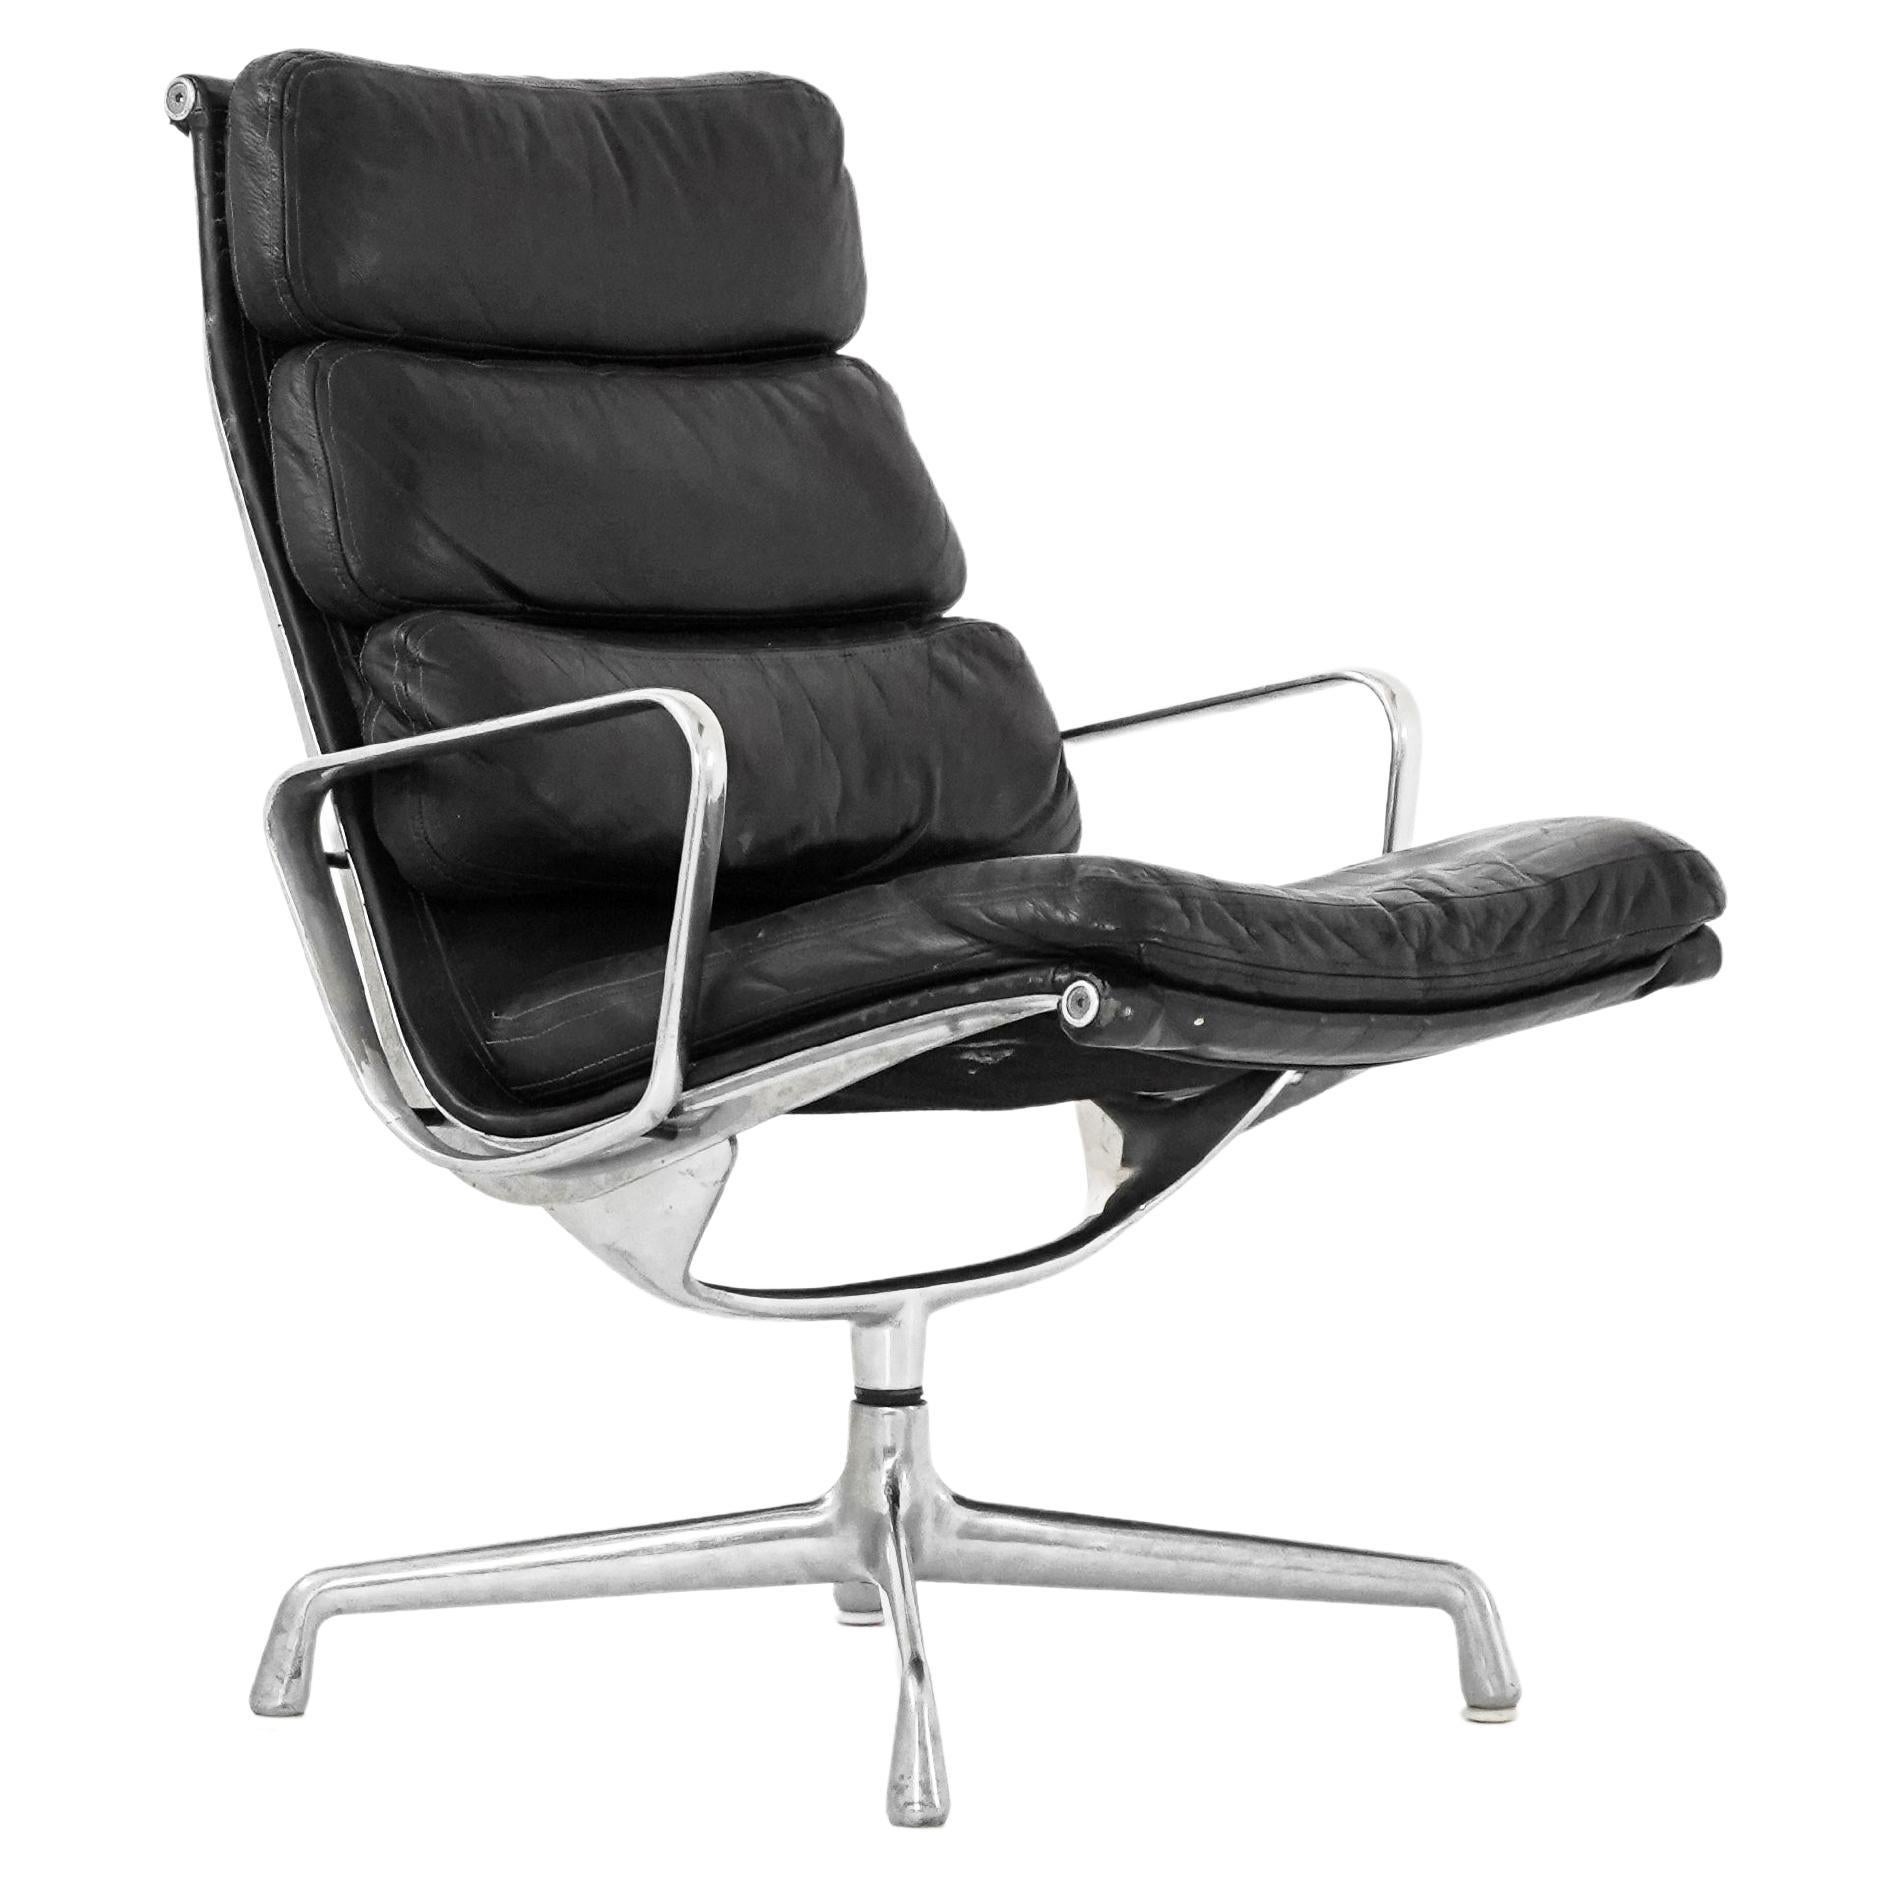 Eames Soft Pad Lounge Chair by Charles and Ray Eames for Herman Miller